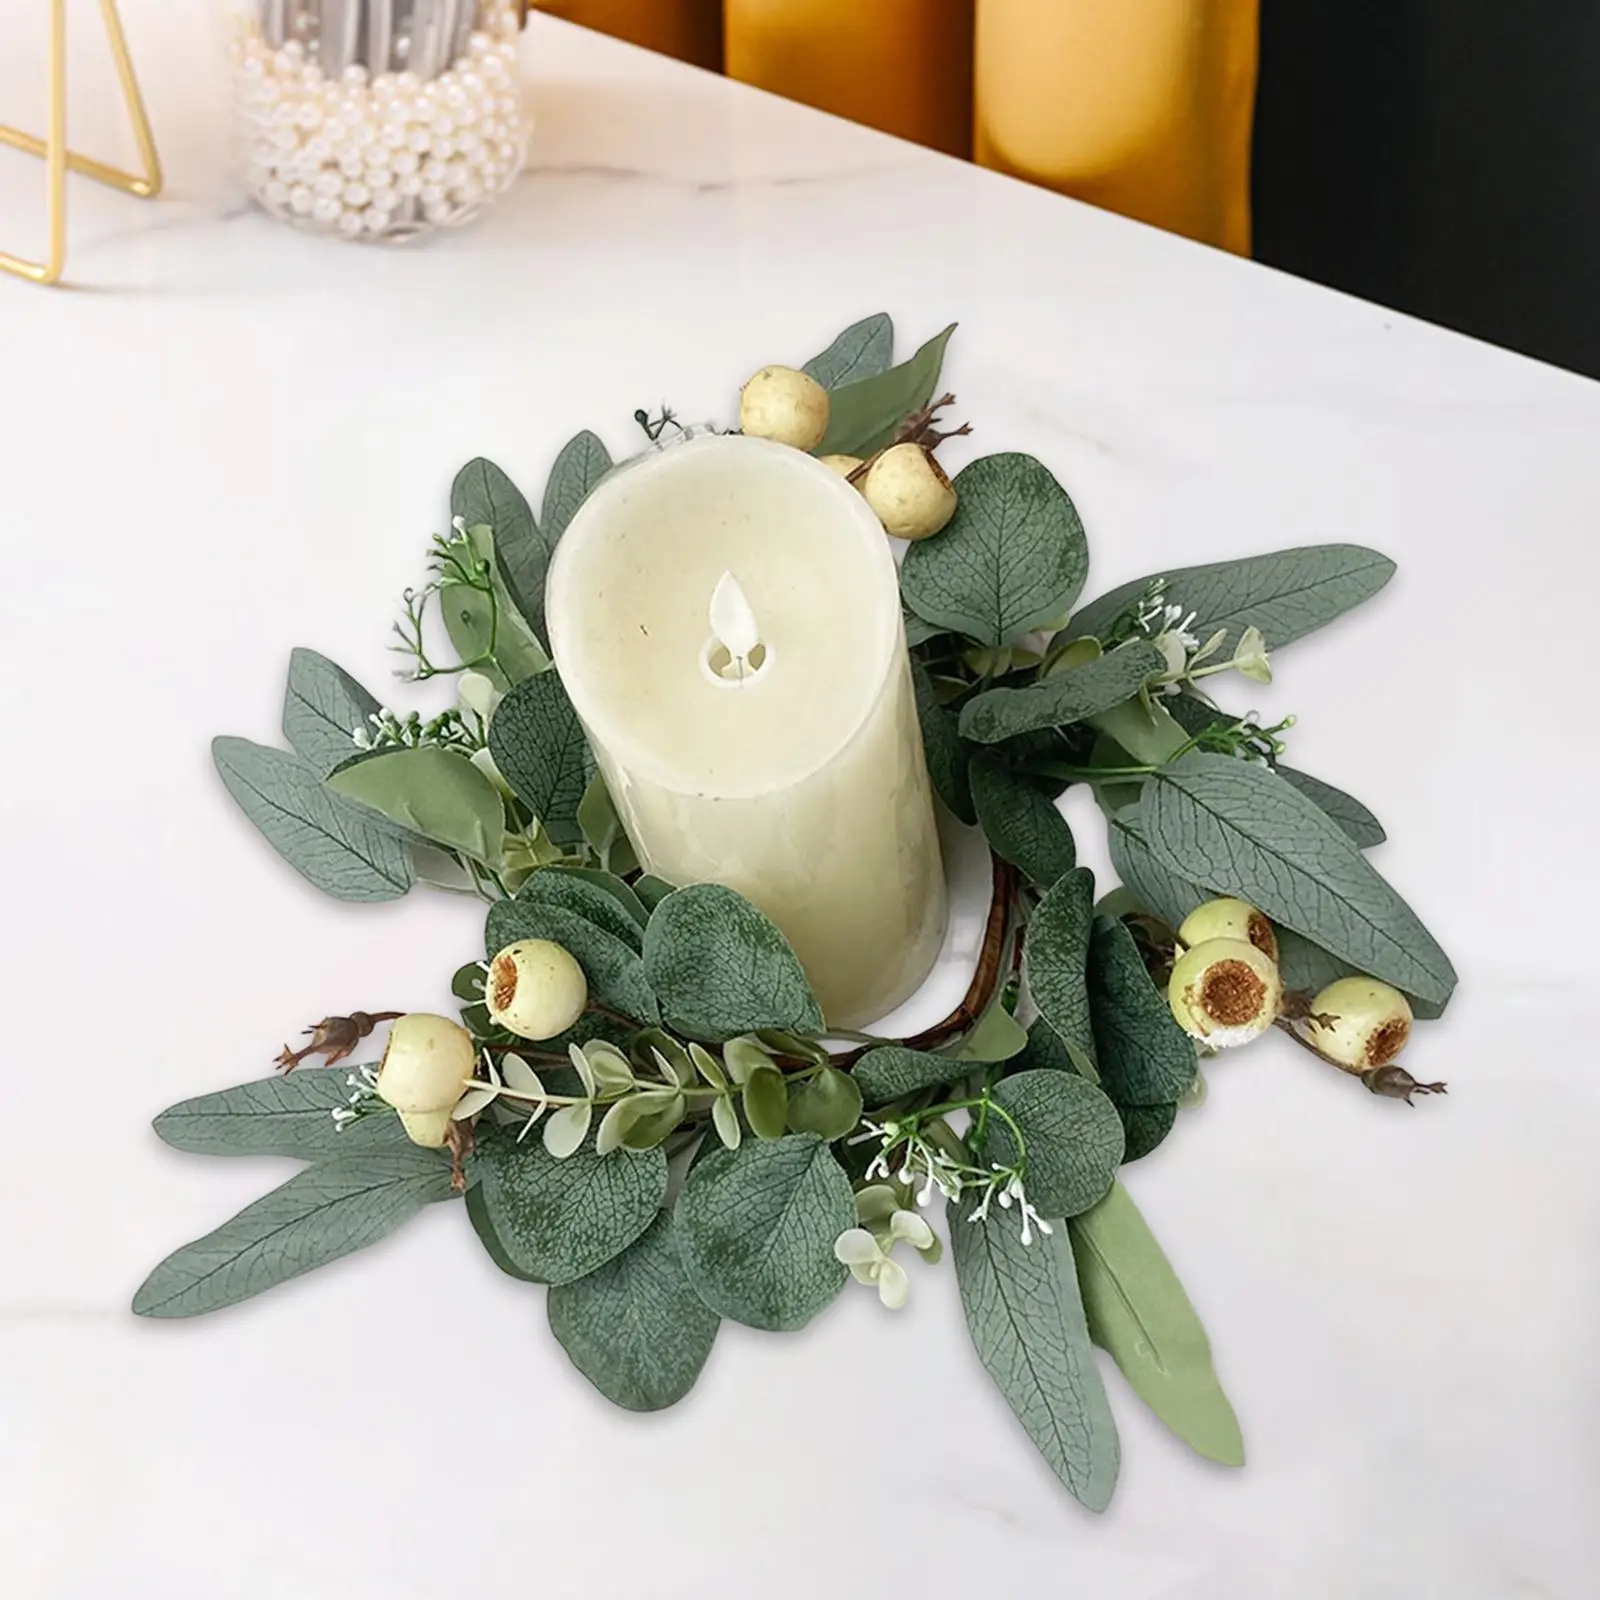 Artificial Eucalyptus Leaves Candles Wreaths Table Centerpiece Greenery Candle Wreath for Wedding Party Cafe Living Room Decor